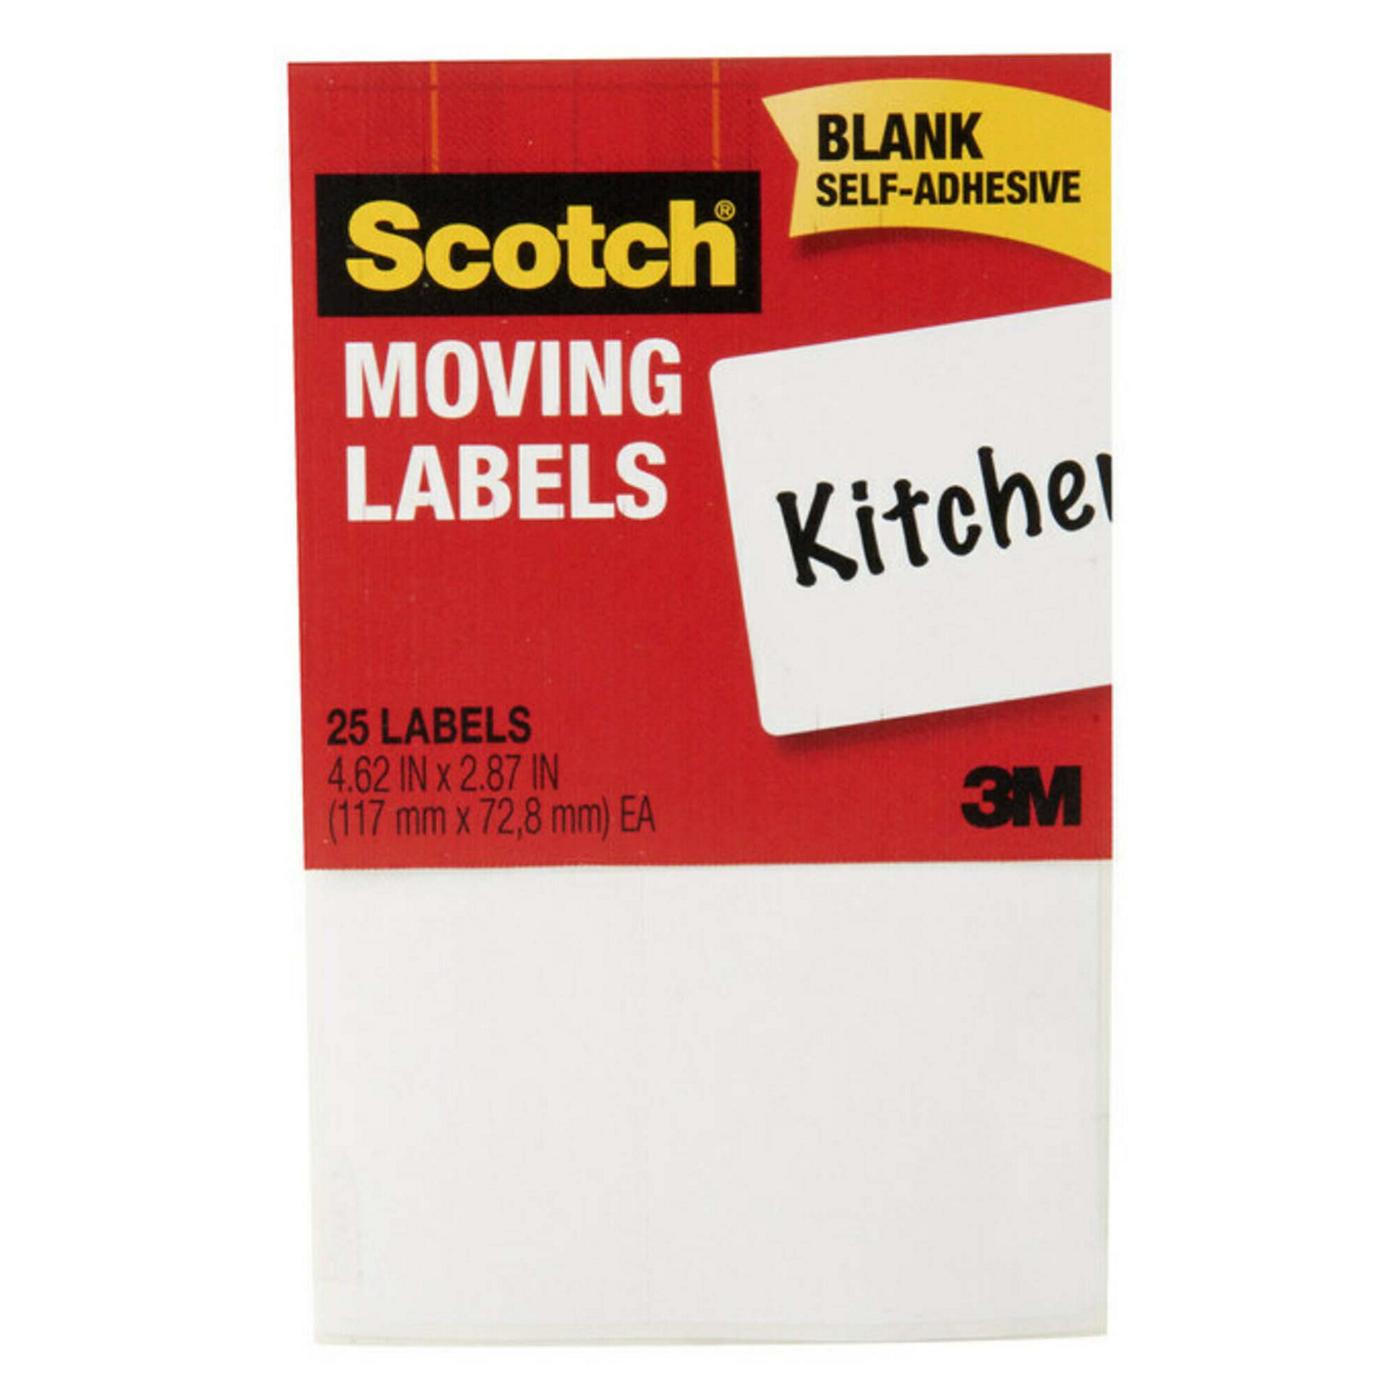 Scotch Moving Labels; image 1 of 2